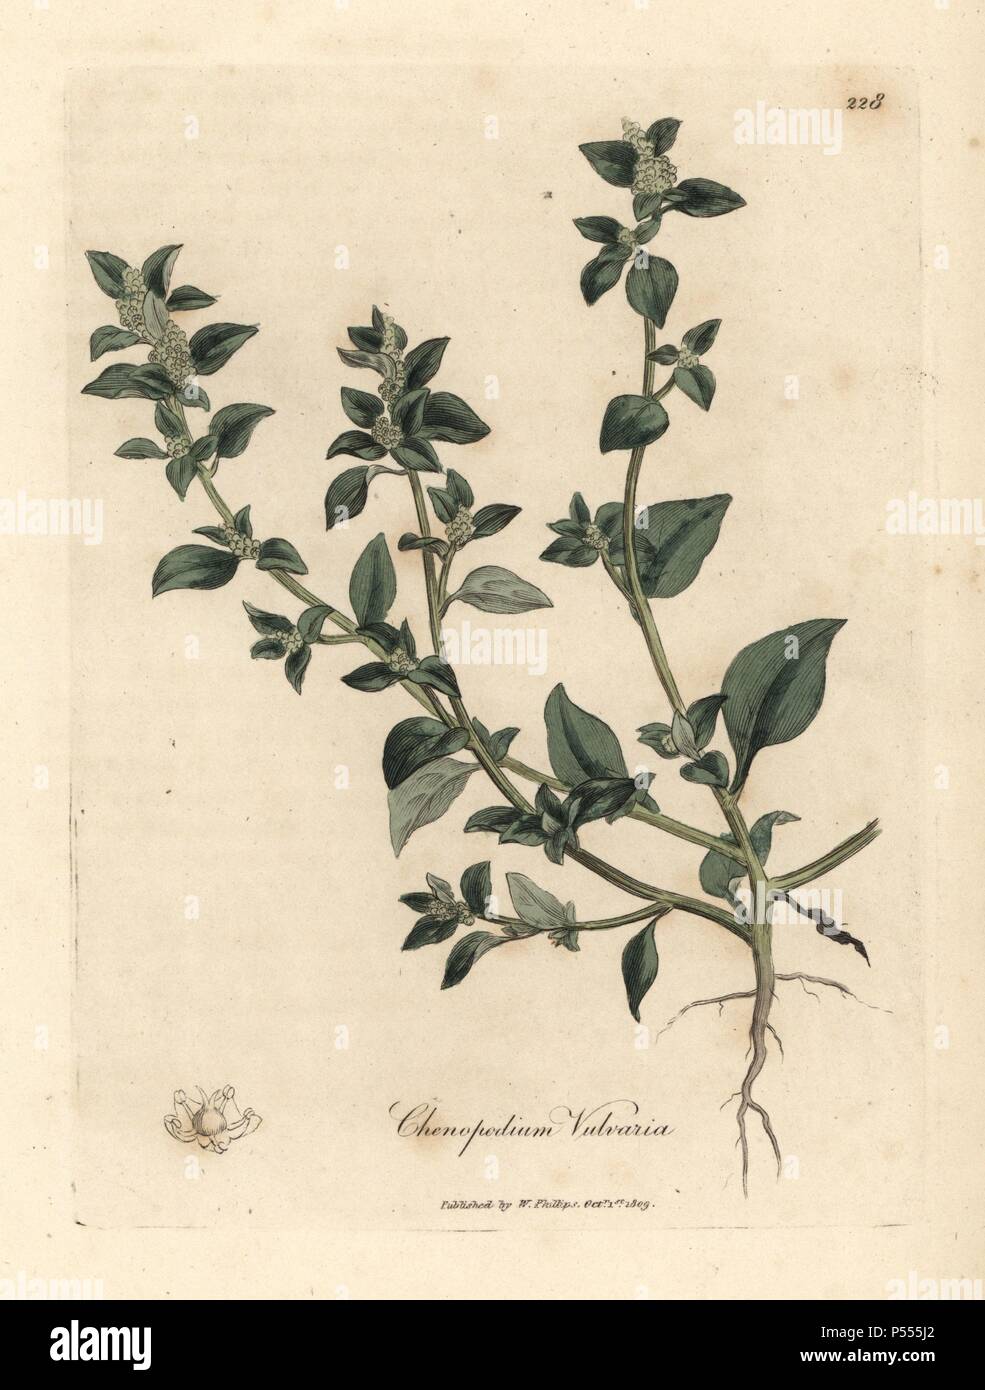 Stinking goosefoot, Chenopodium vulvaria. Handcoloured copperplate engraving from a botanical illustration by James Sowerby from William Woodville and Sir William Jackson Hooker's 'Medical Botany,' John Bohn, London, 1832. The tireless Sowerby (1757-1822) drew over 2, 500 plants for Smith's mammoth 'English Botany' (1790-1814) and 440 mushrooms for 'Coloured Figures of English Fungi ' (1797) among many other works. Stock Photo